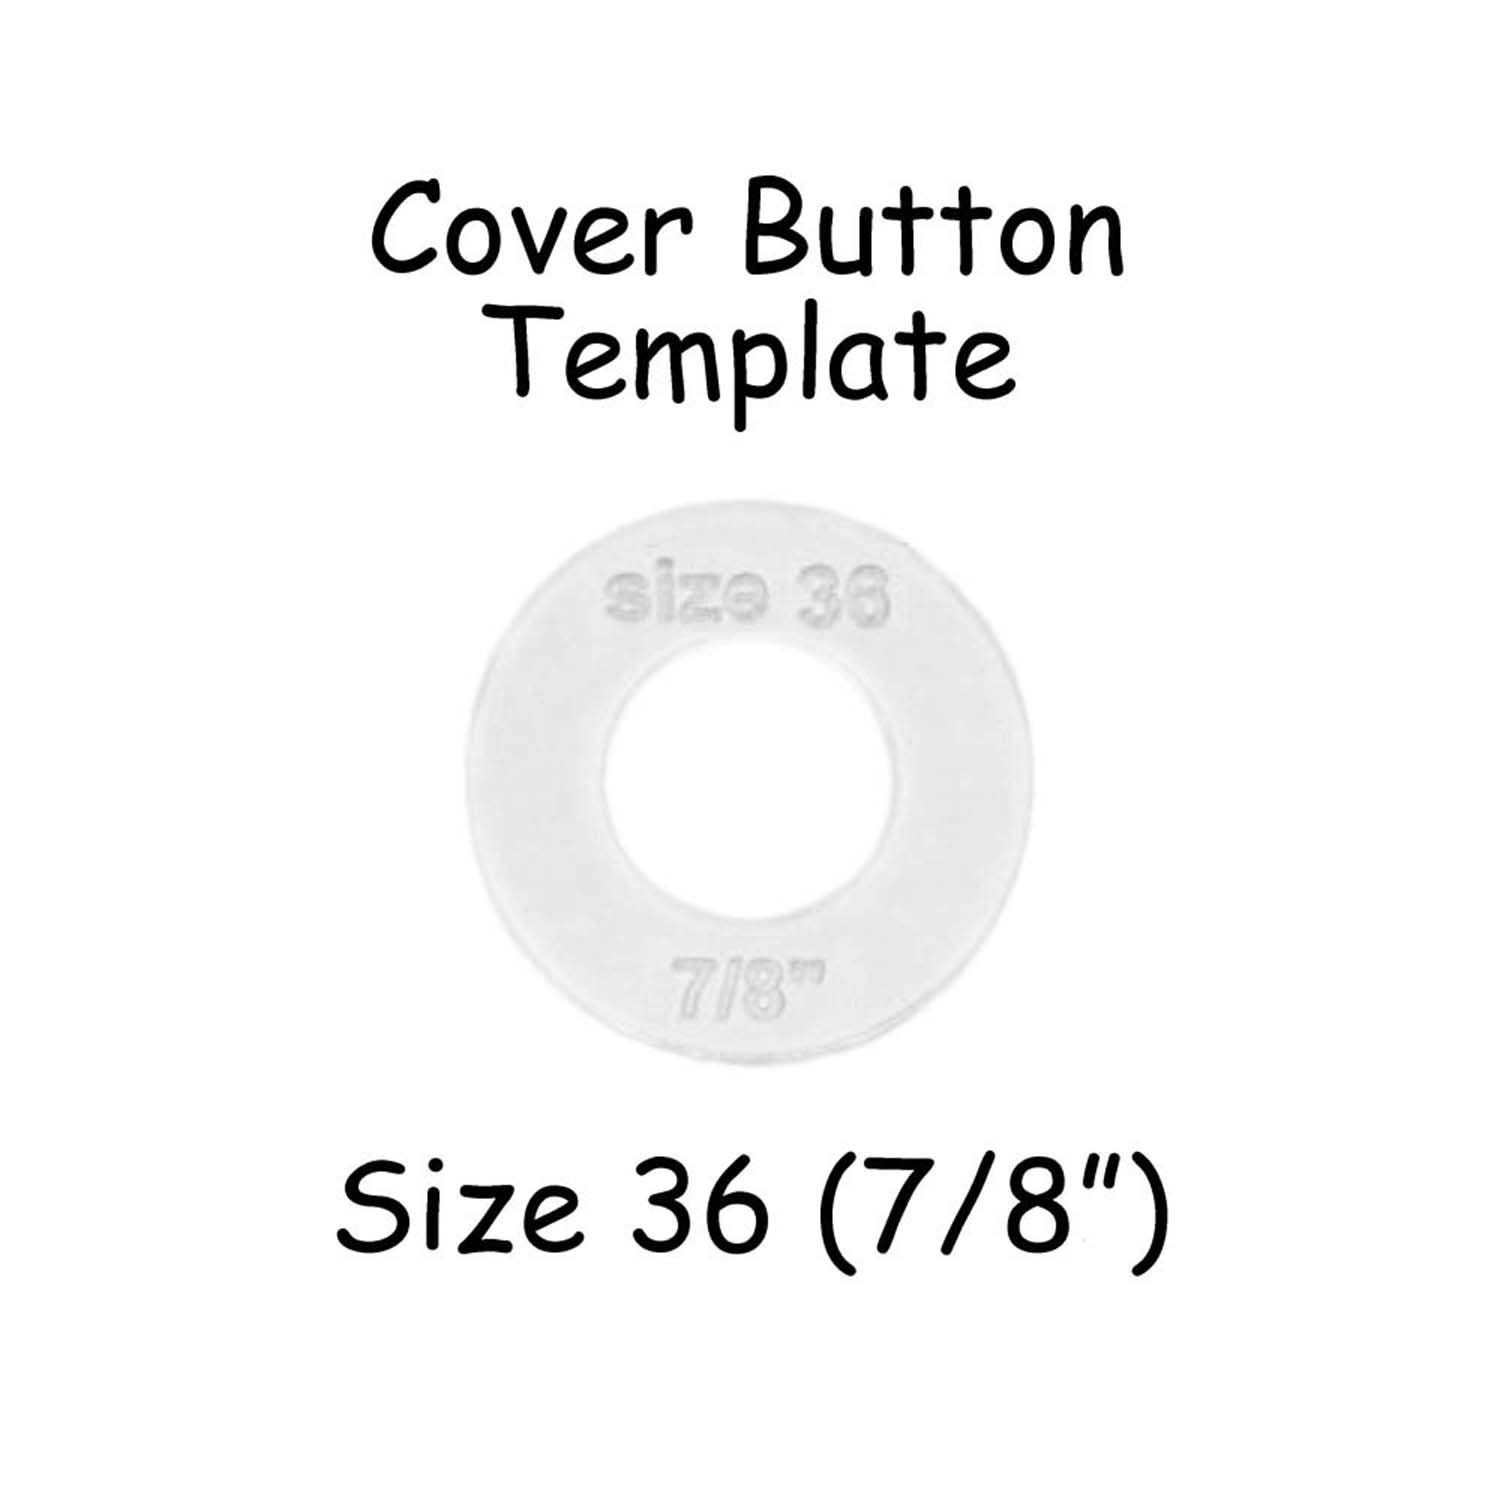 Cover Buttons - 7/8 (Size 36) - Wire Backs - Qty 50